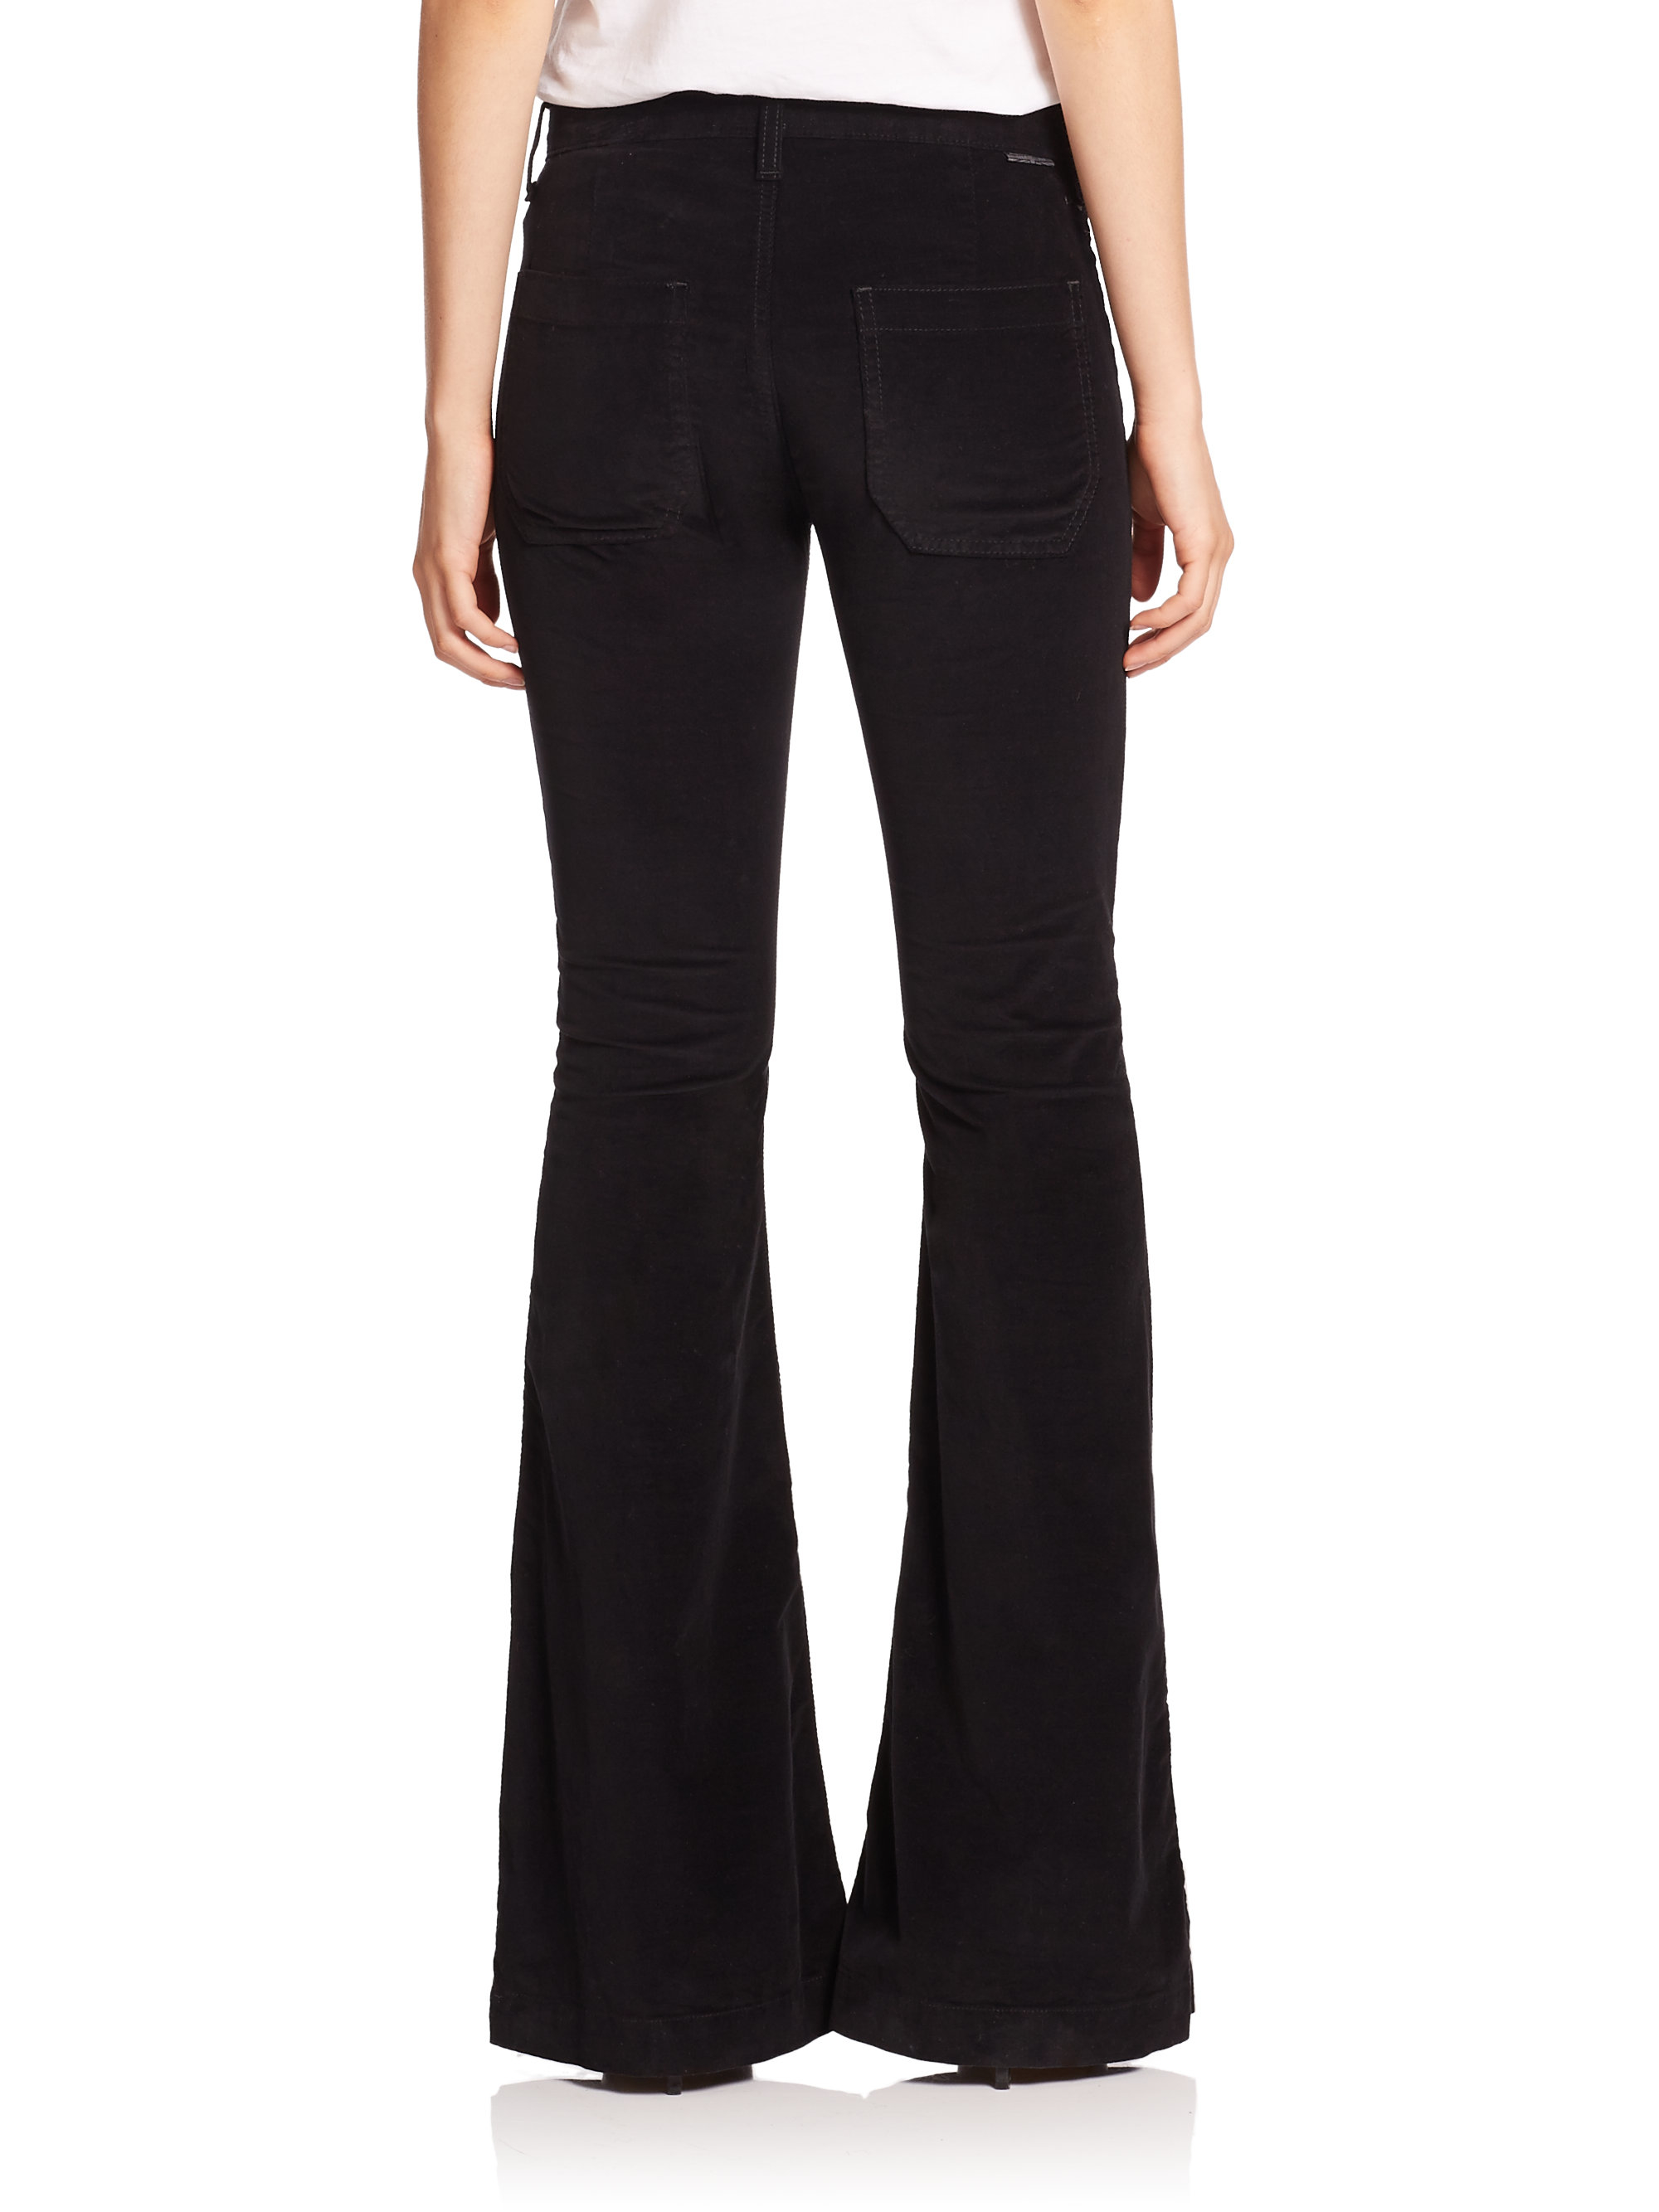 Hudson Jeans Taylor Corduroy Flare Pants in Black - Lyst